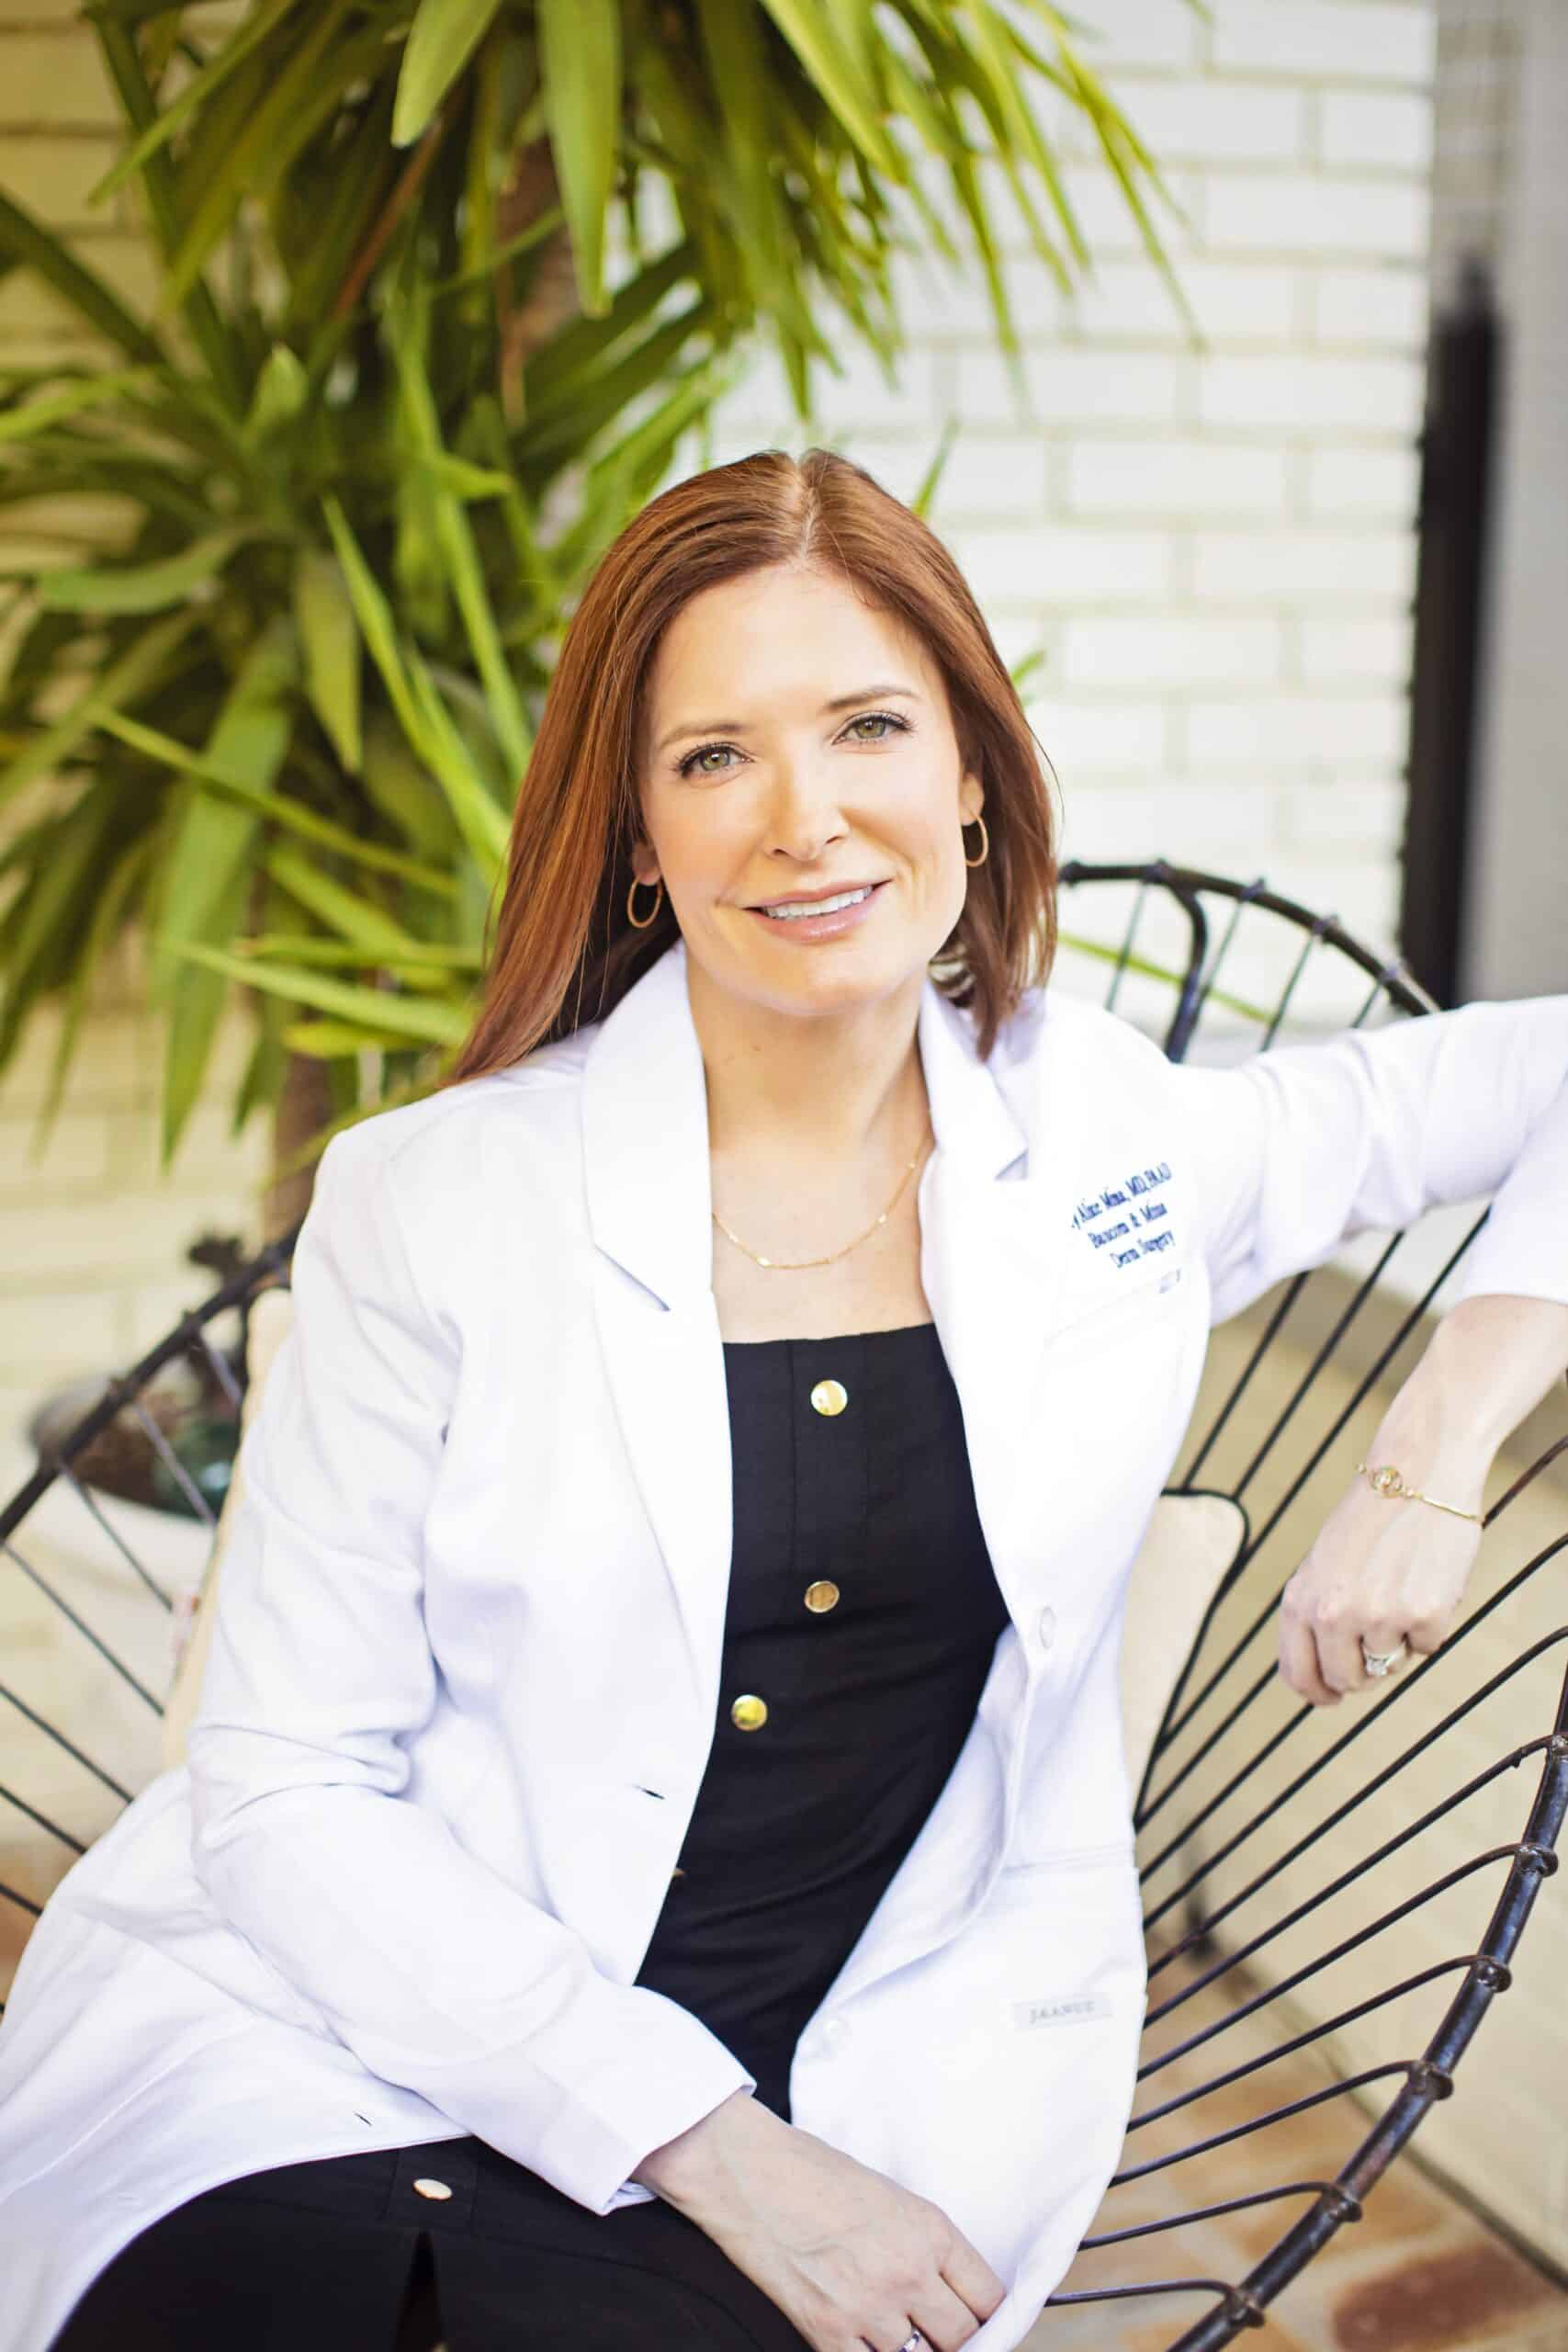 Dr. Mary Alice Mina in a white lab coat, specializing in menopause skin changes, sitting on a metal bench and smiling at the camera.